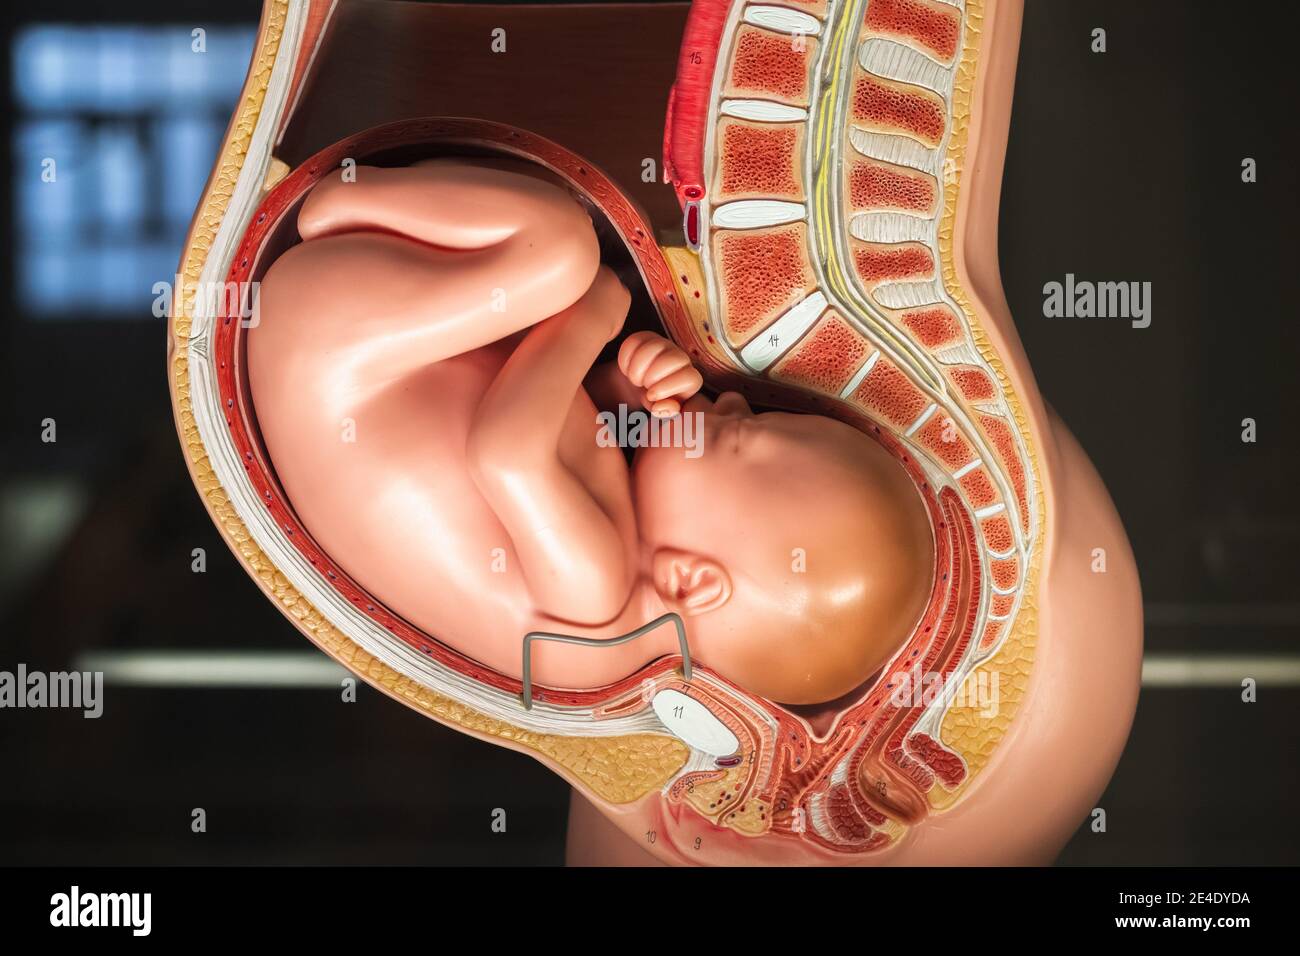 Ninth month pregnancy pelvis anatomy model displayed at Science Museum in London Stock Photo